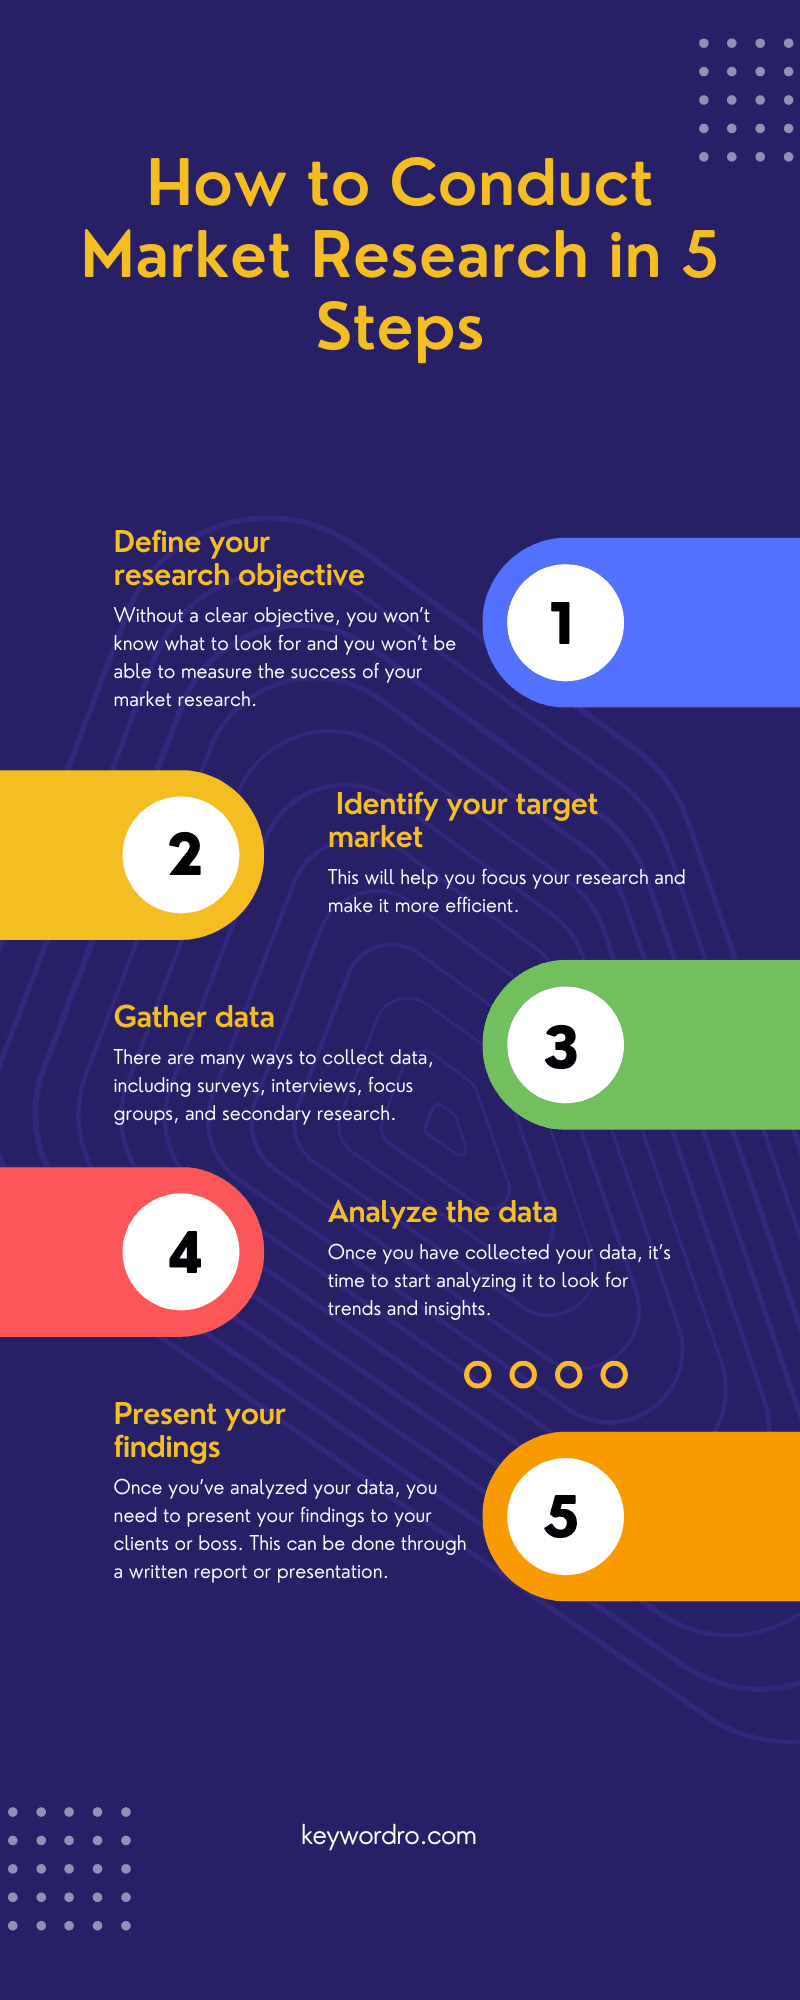 Keyword research infographic